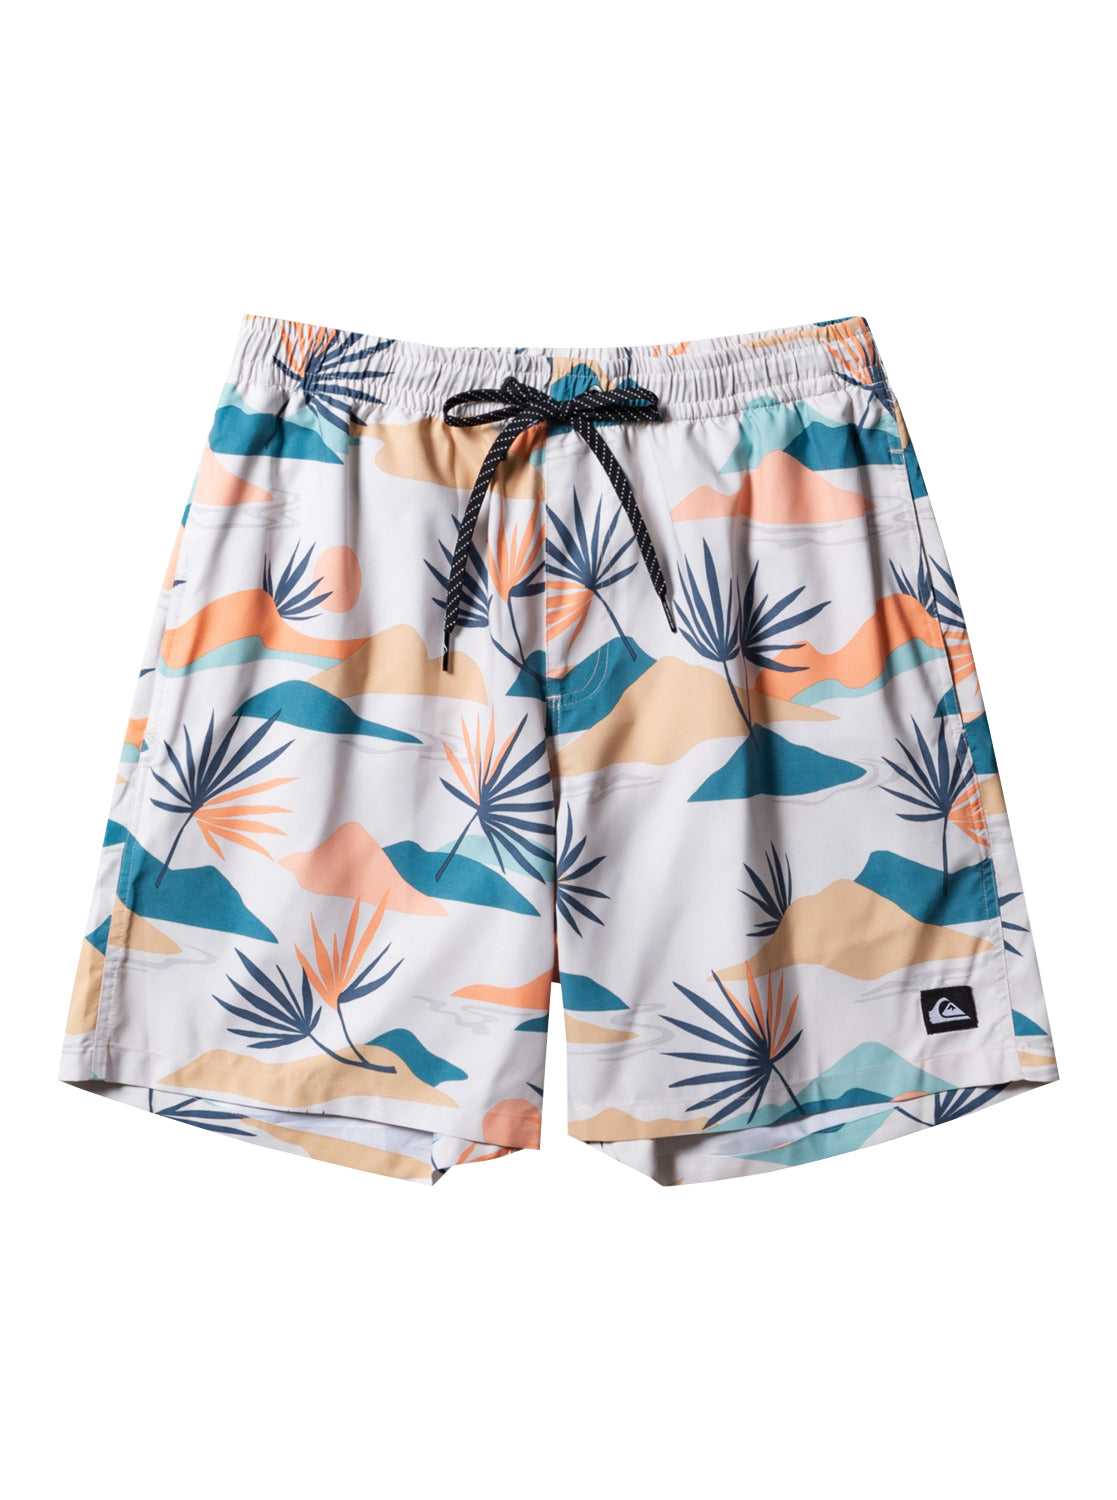 Quiksilver Everyday Jam Mixed Volley 17" Shorts WDW7 L